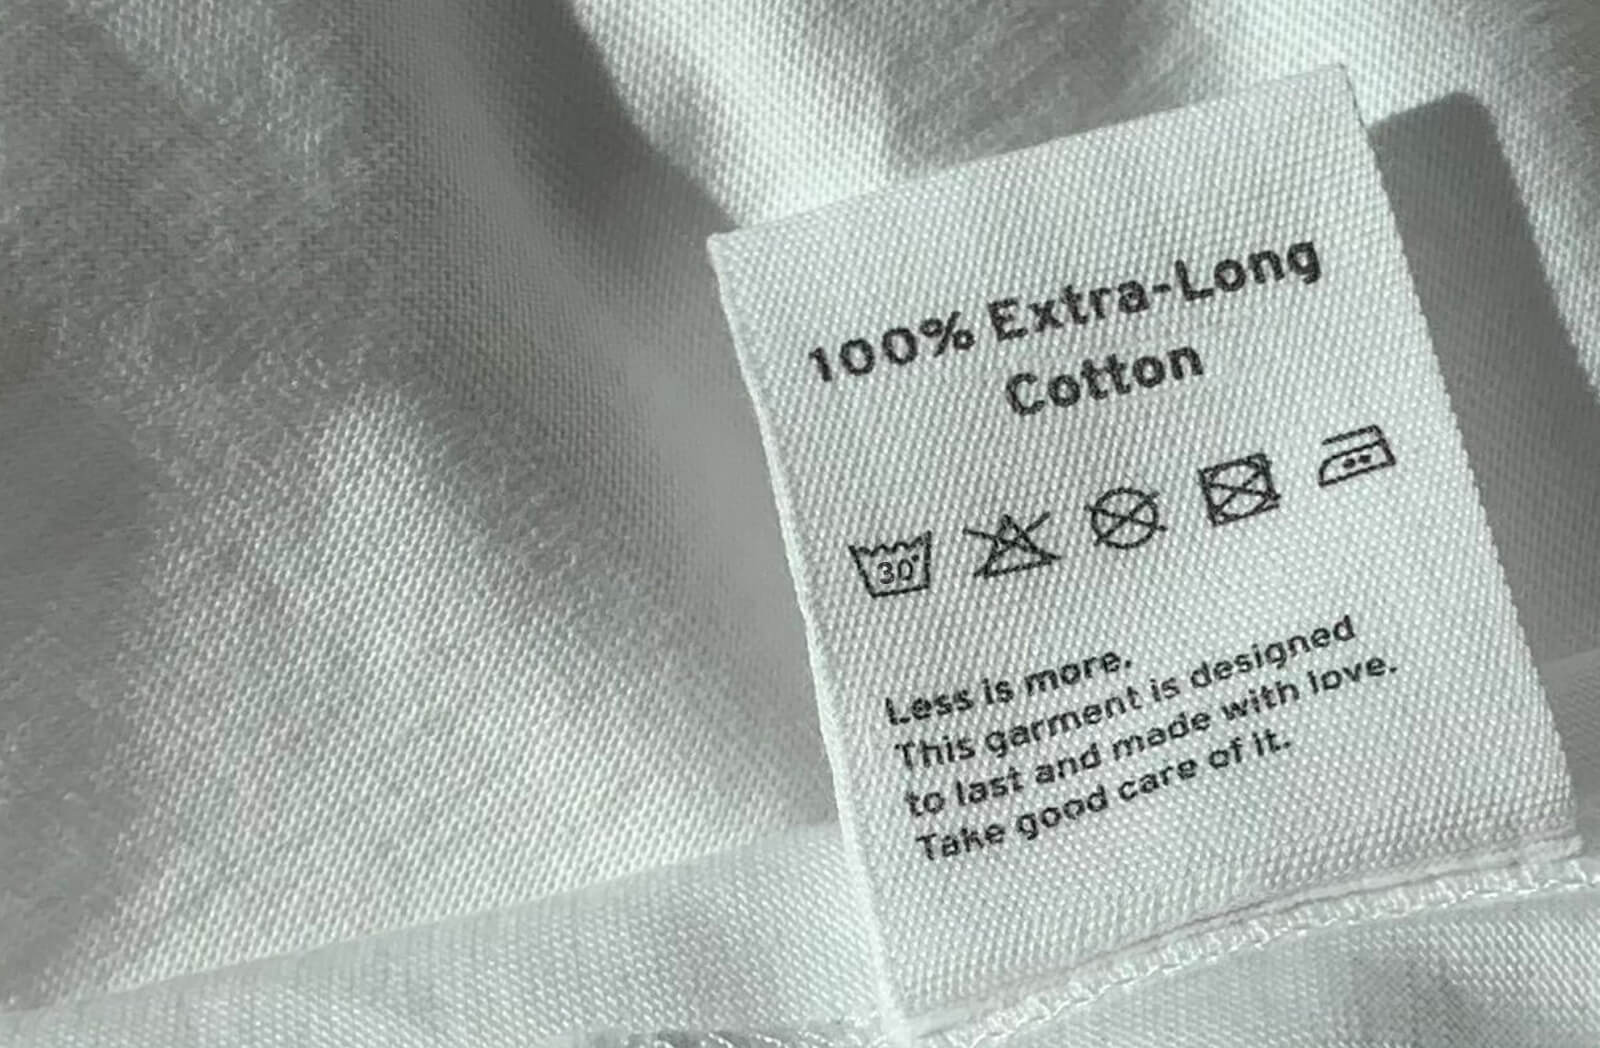 care instructions label on the cotton fabric